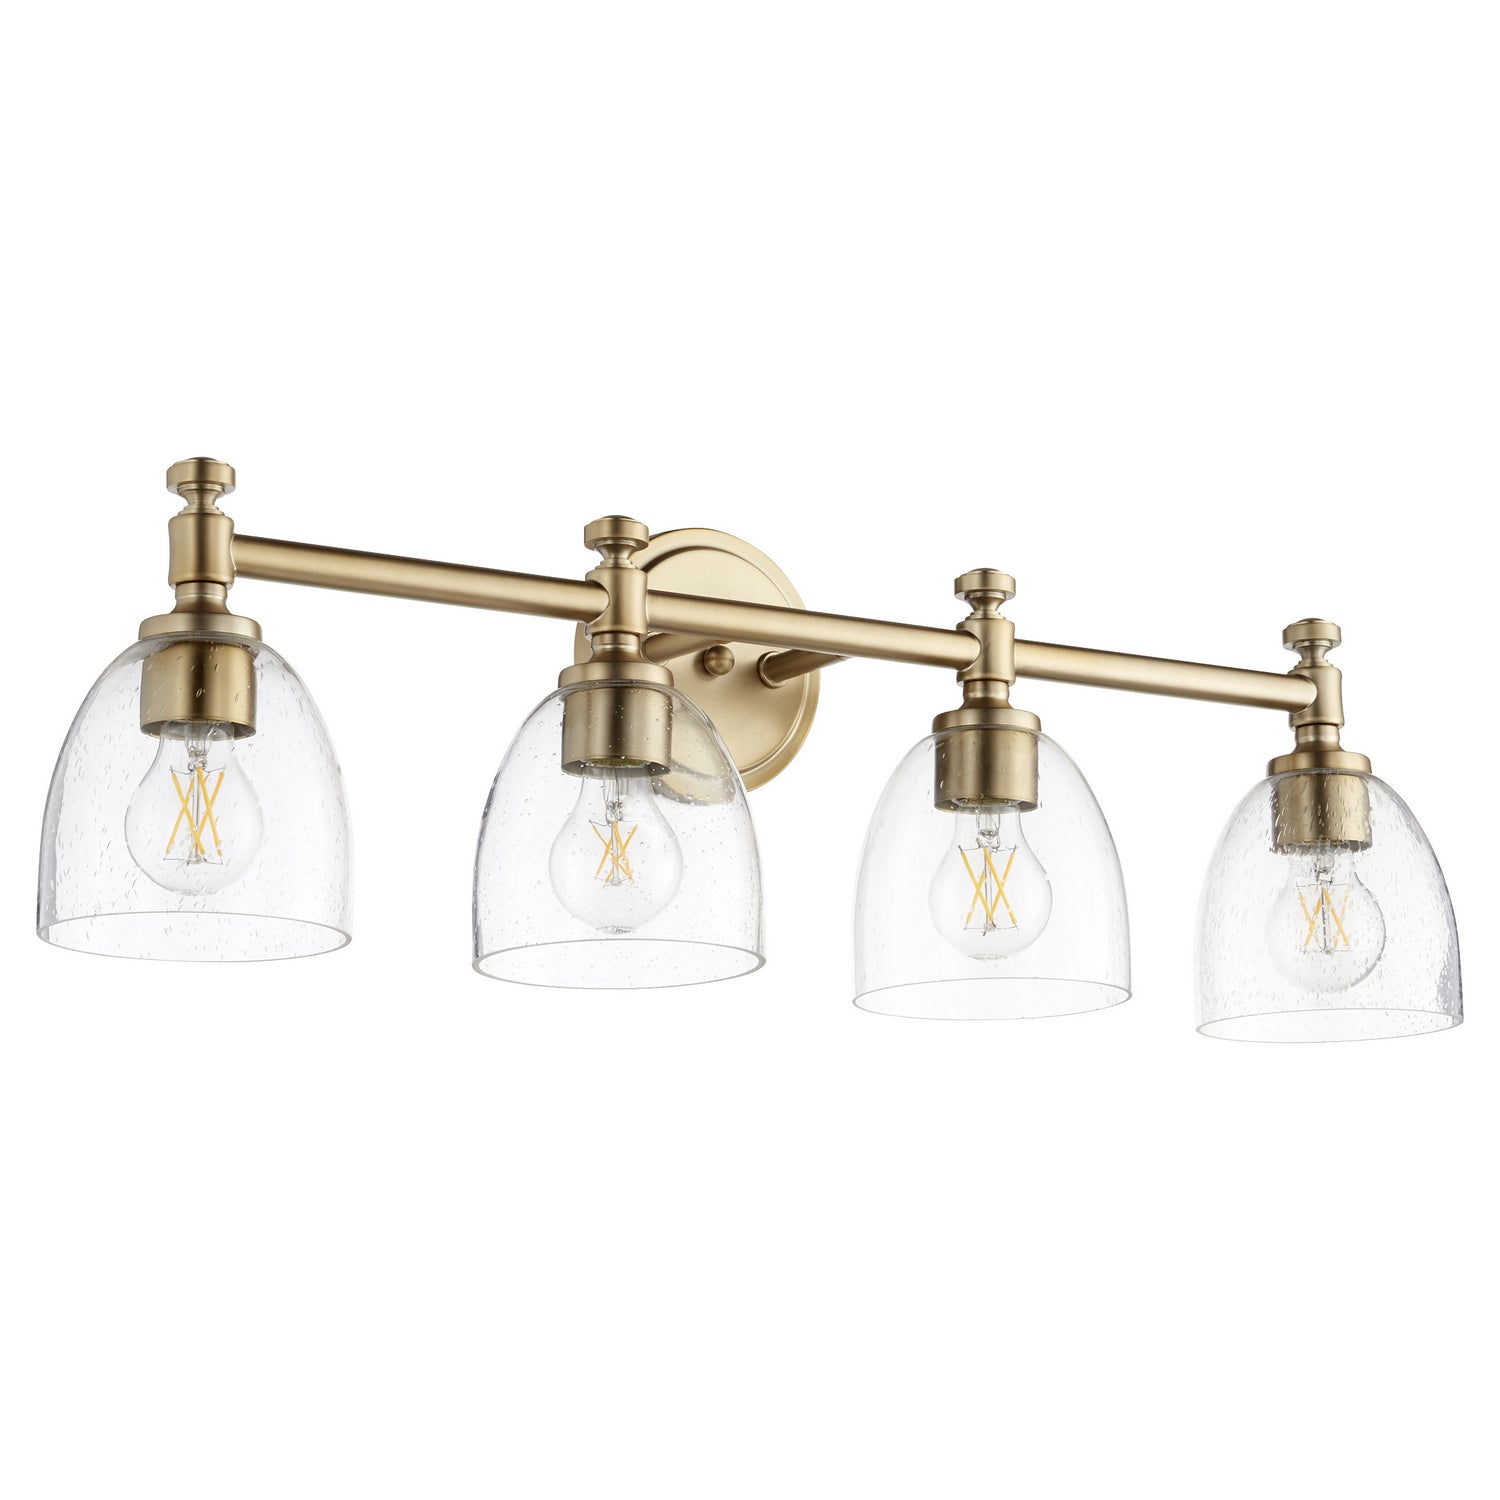 Quorum - 5122-4-280 - Four Light Vanity - Rossington - Aged Brass w/ Clear/Seeded